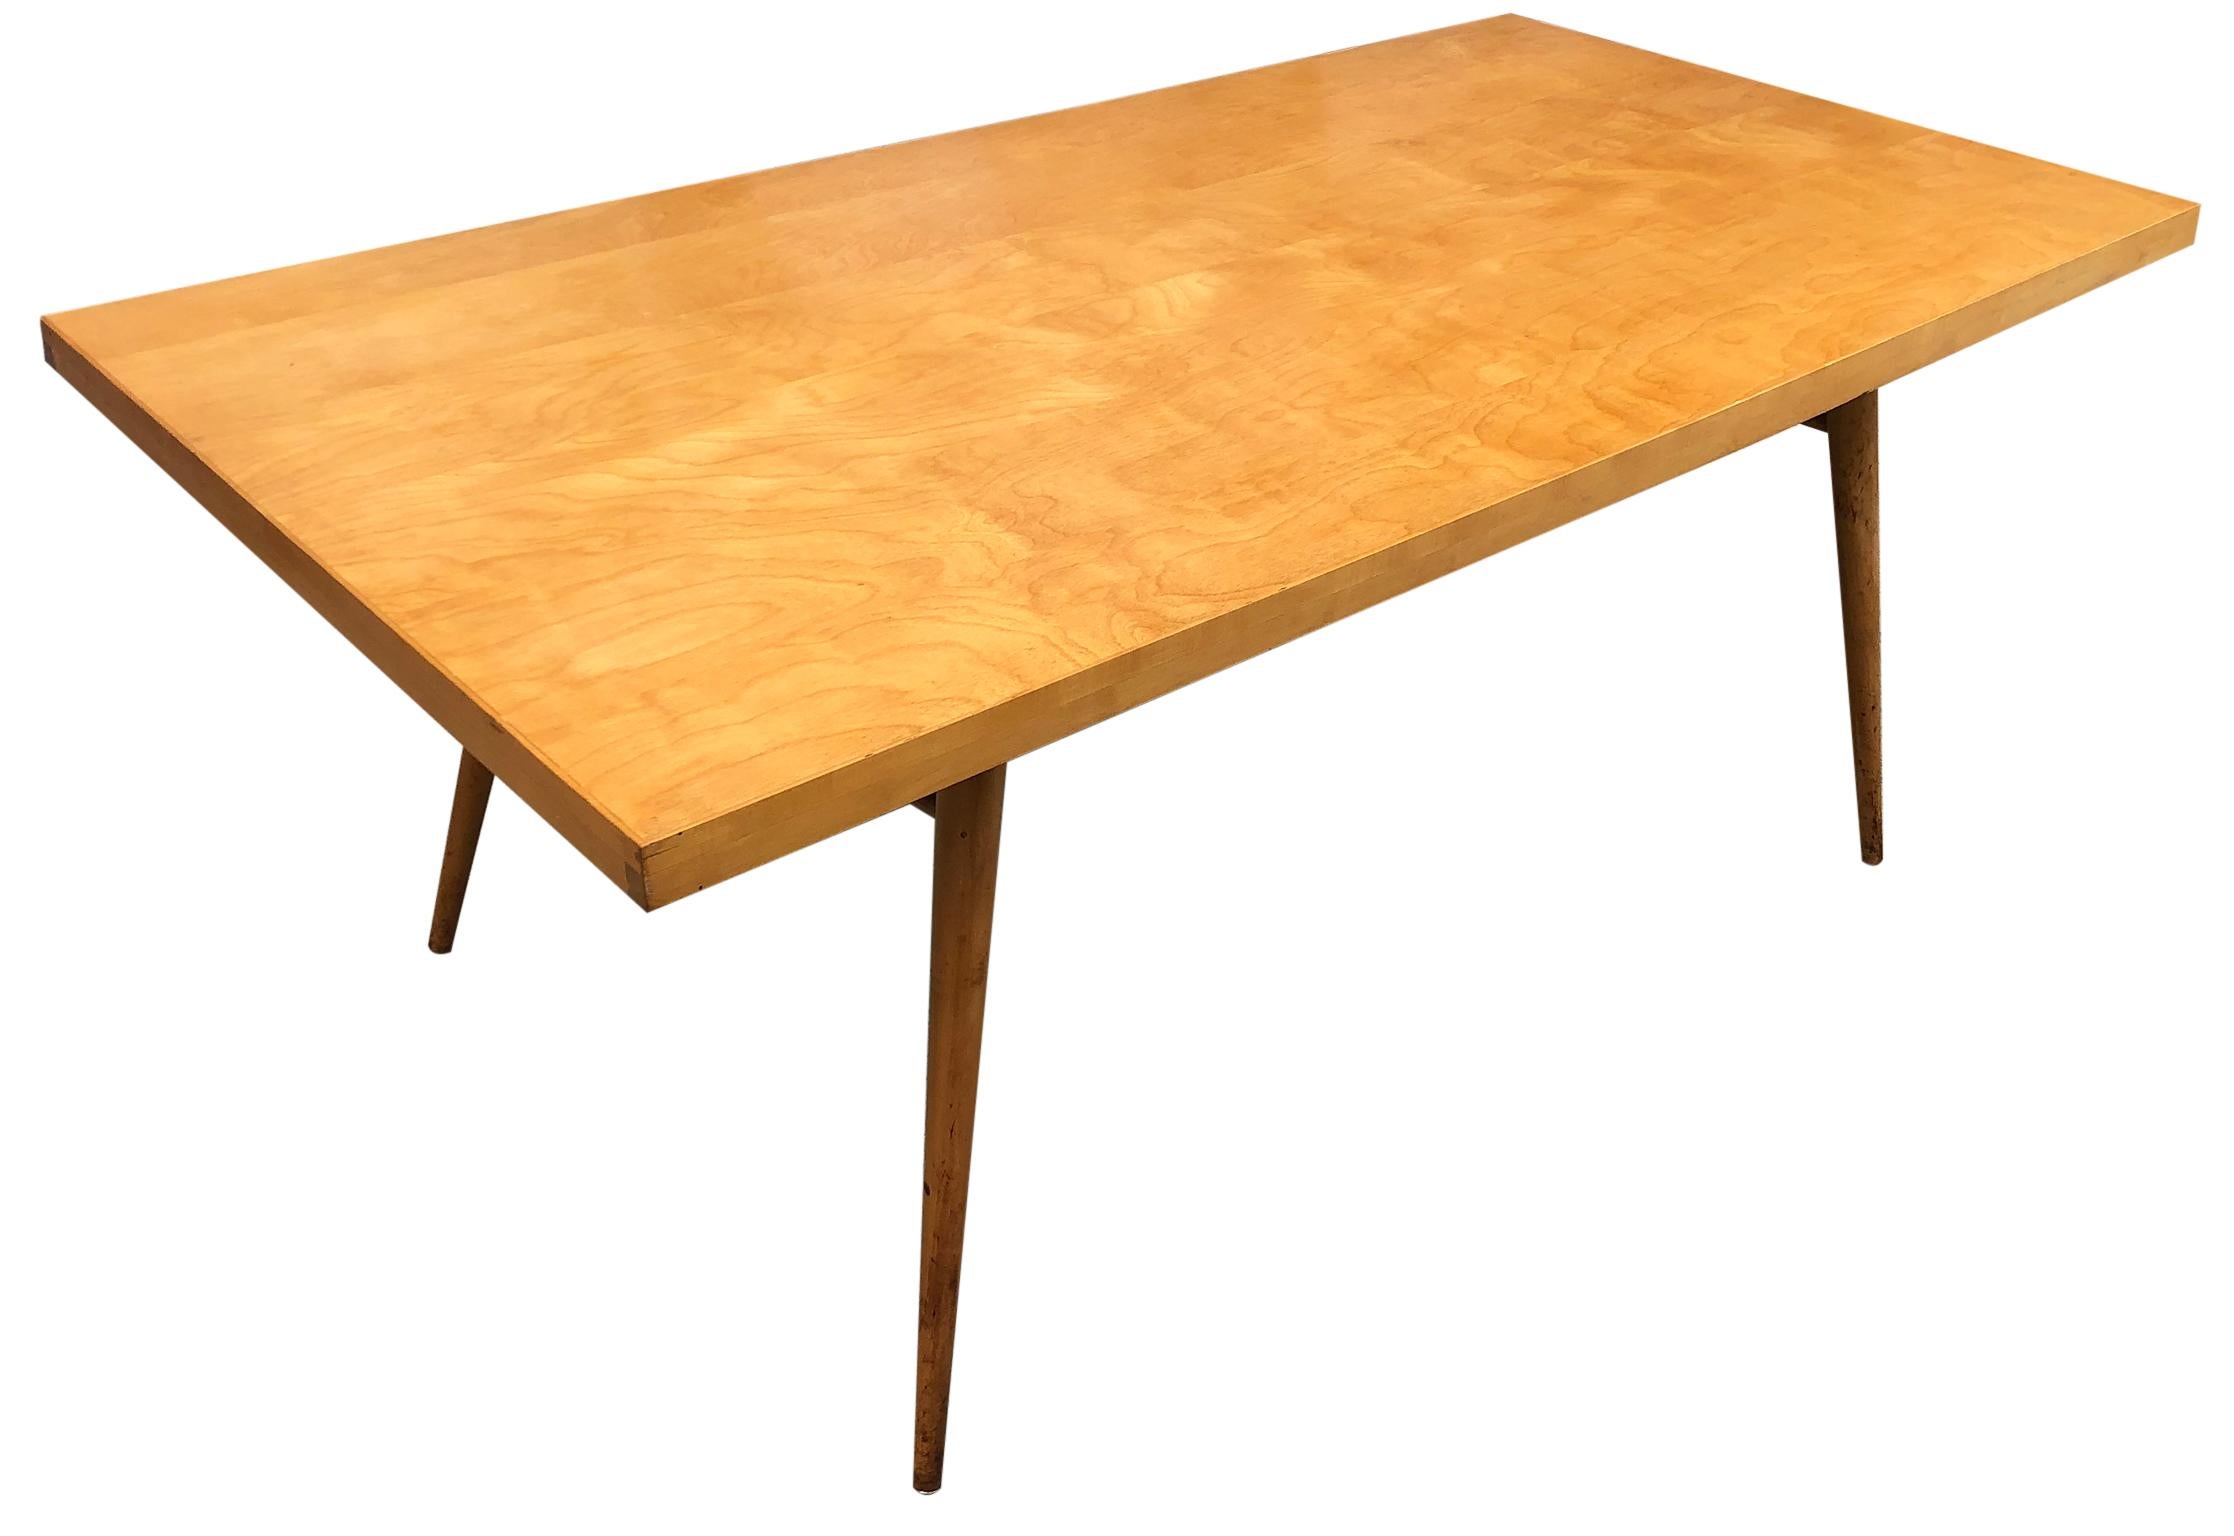 Beautiful early 1950s Paul McCobb solid maple dining table #1522 with 4 tapered legs and dowel supports. Rare solid (1) section maple tabletop with a blonde finish in great vintage condition. Legs unbolt - easy to move. You are buying (1) dining